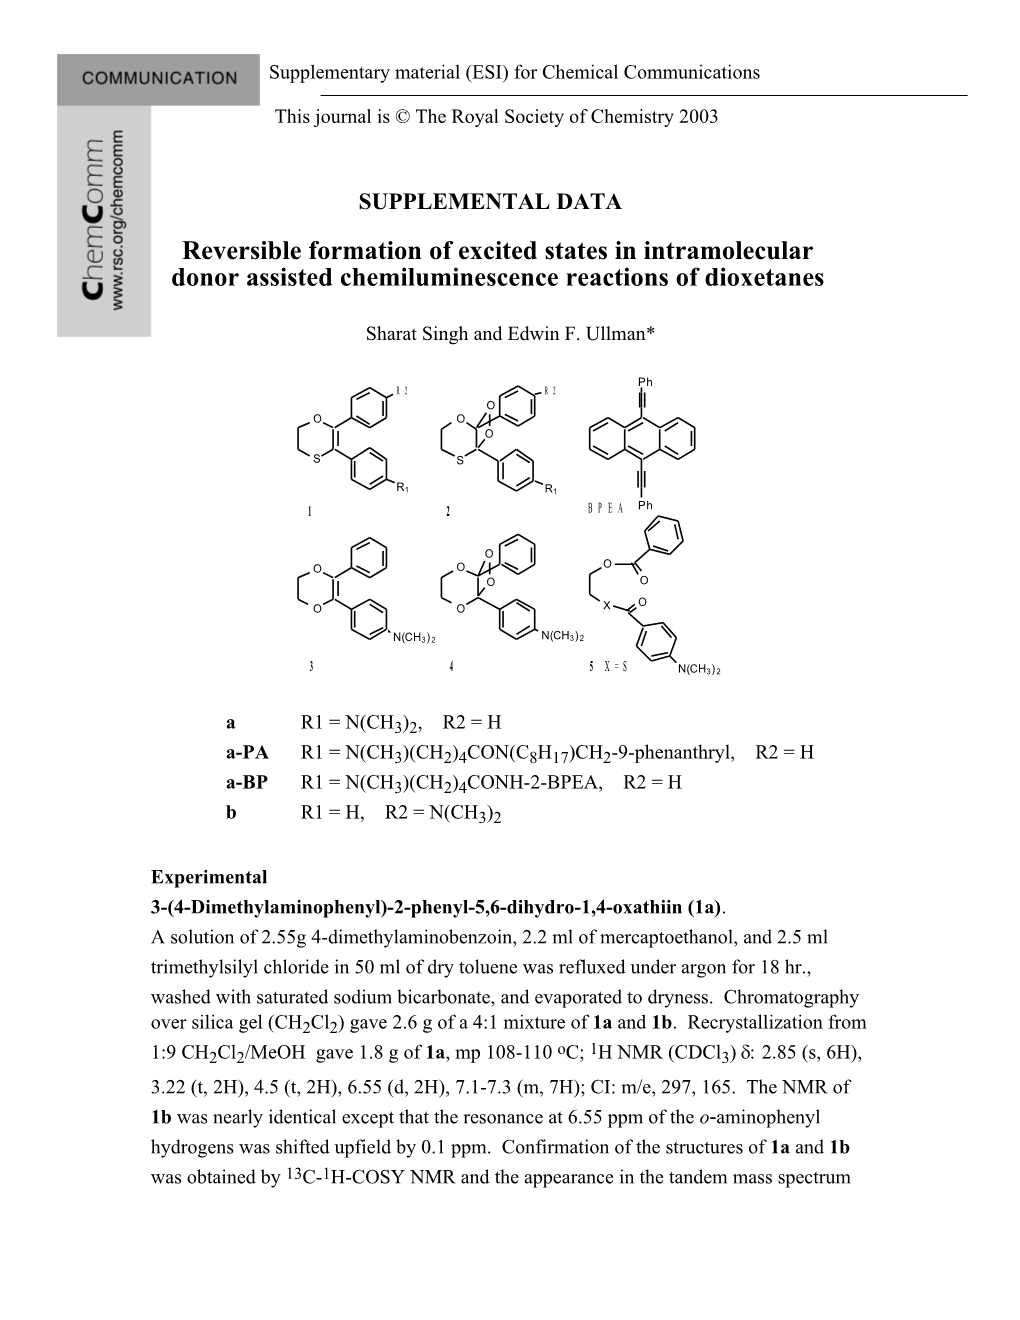 Supplementary Material (ESI) for Chemical Communications s2